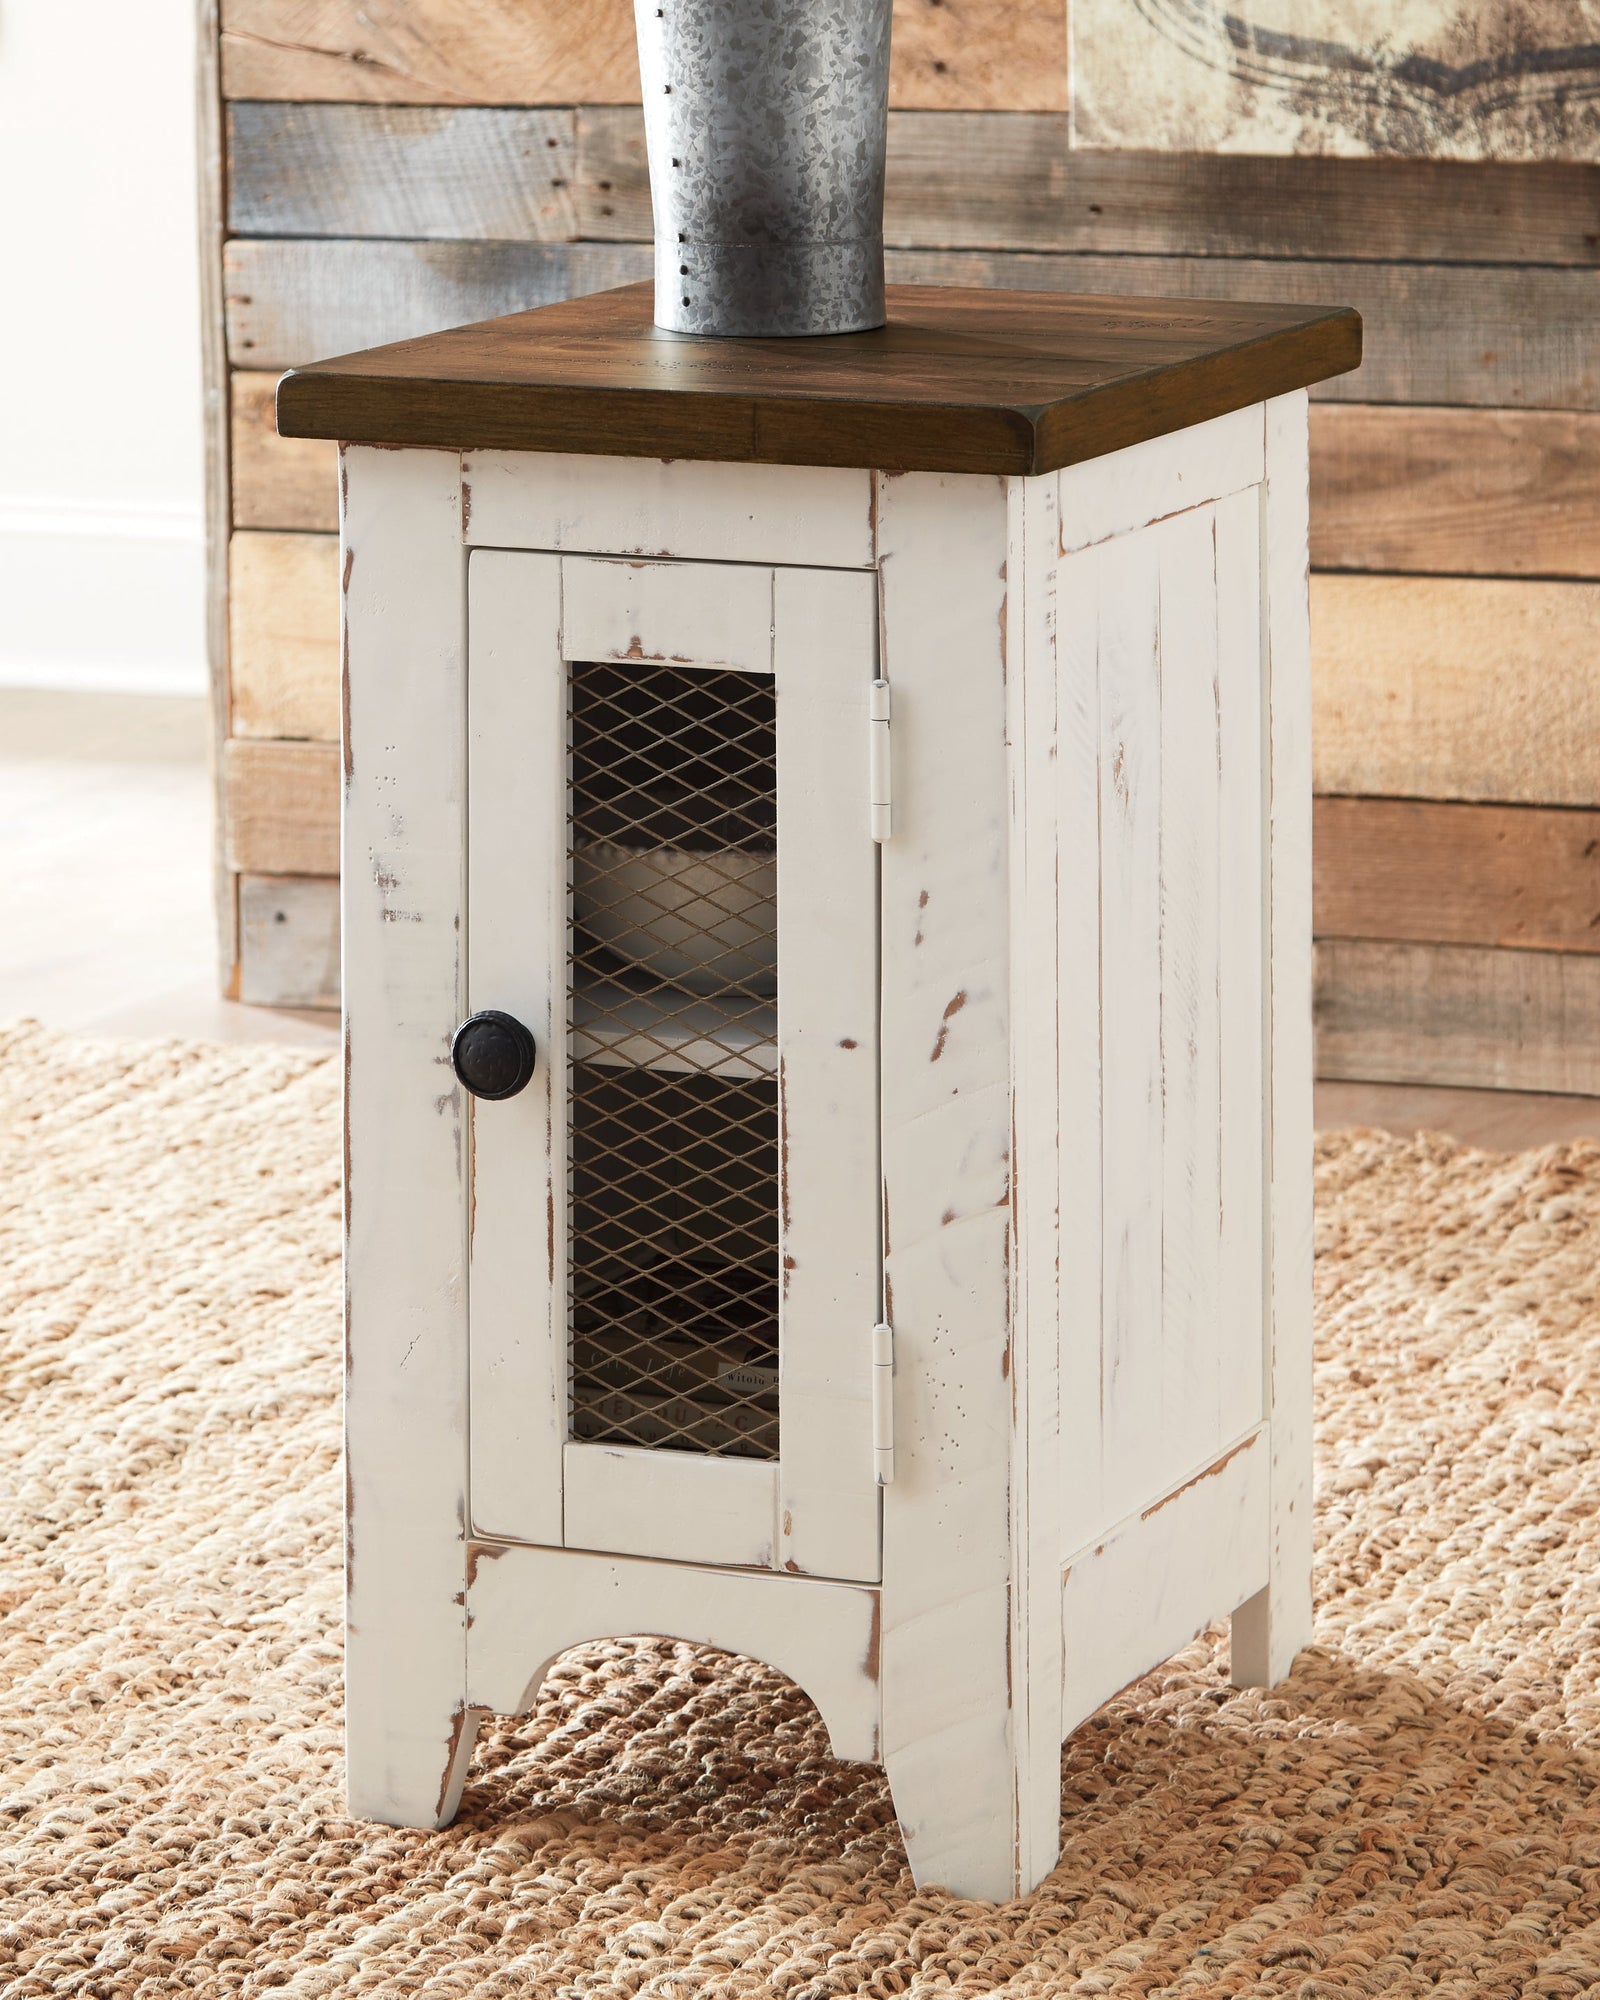 Wystfield White/Brown Chairside End Table